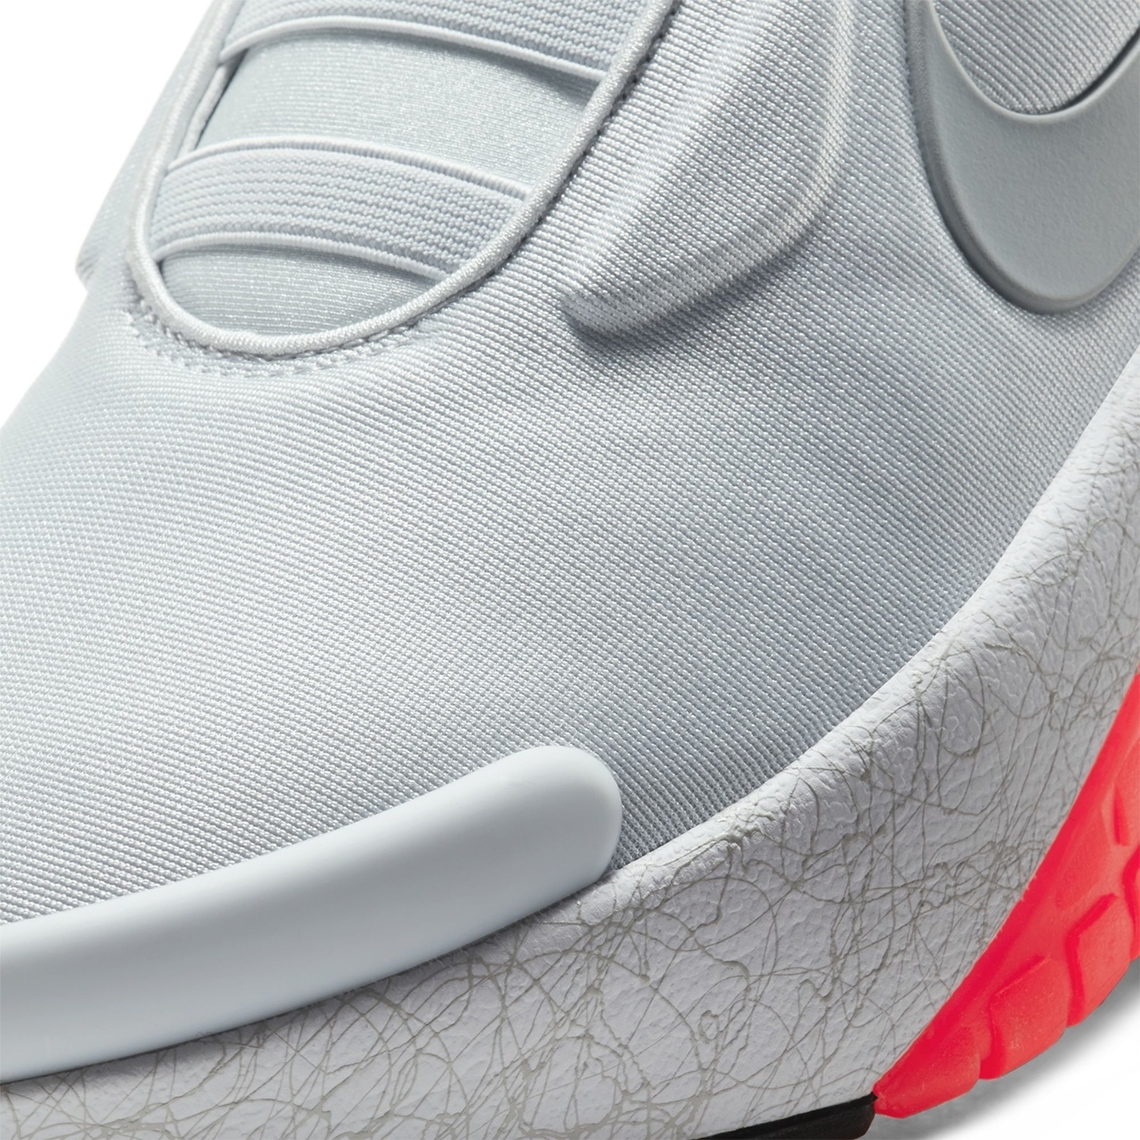 Nike Adapt Auto Max Infrared Official Images 9